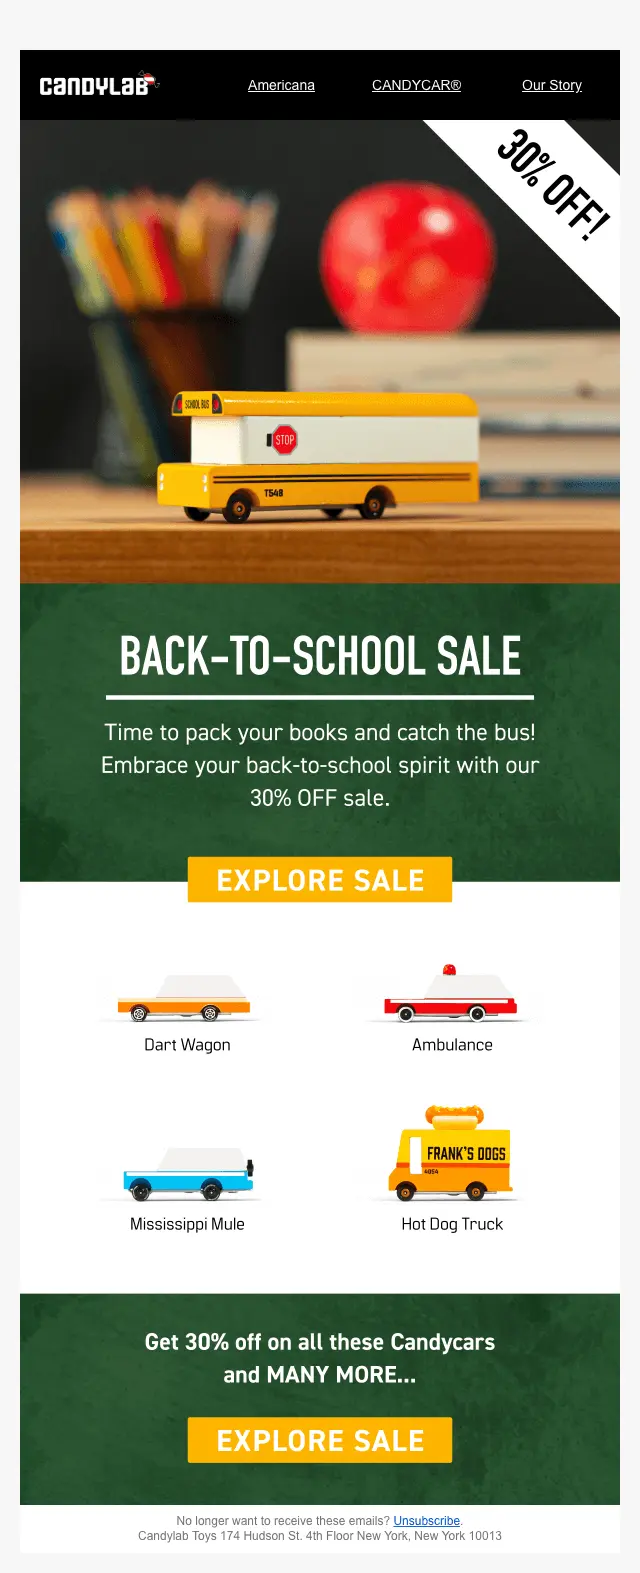 Image shows a back-to-school email from Candylab Toys, with a back-to-school promotion